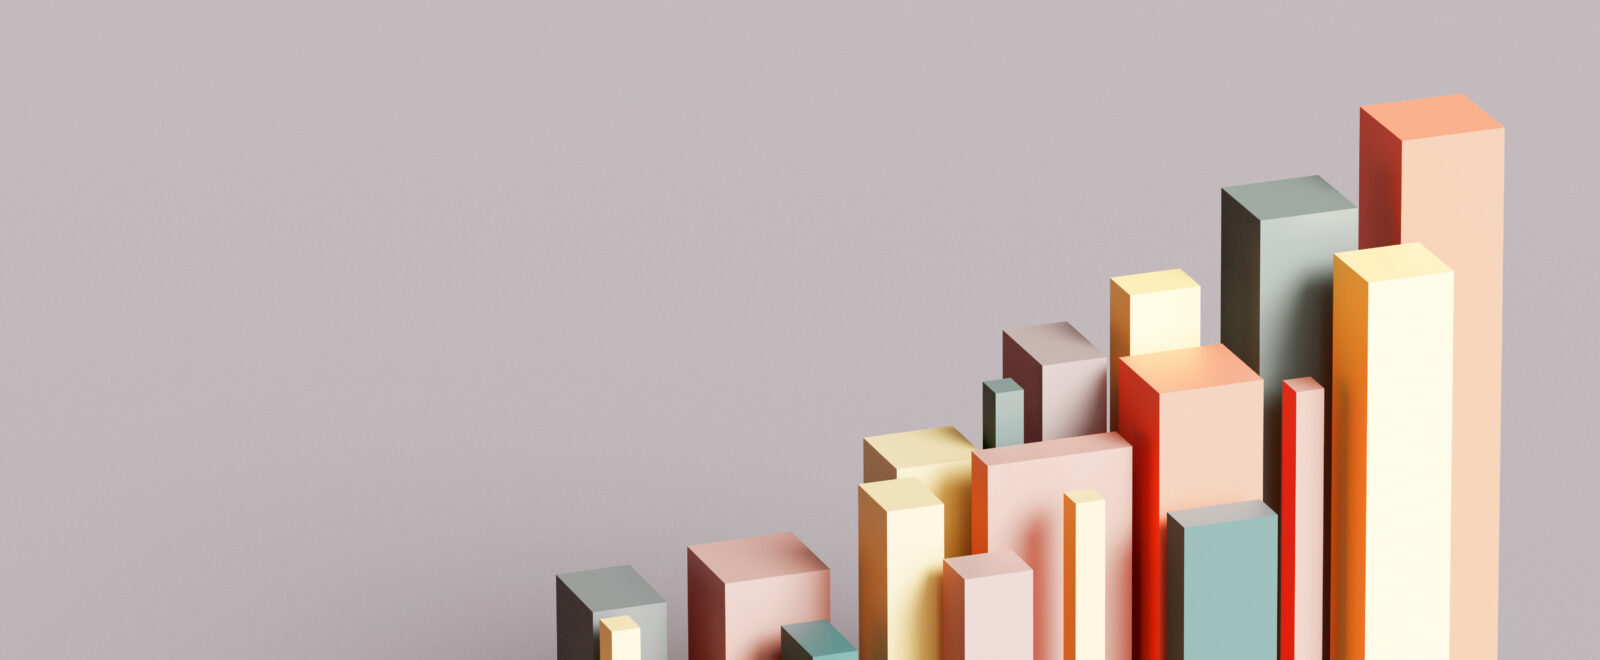 3D rendered financial performance bar chart results shot on a reflective background